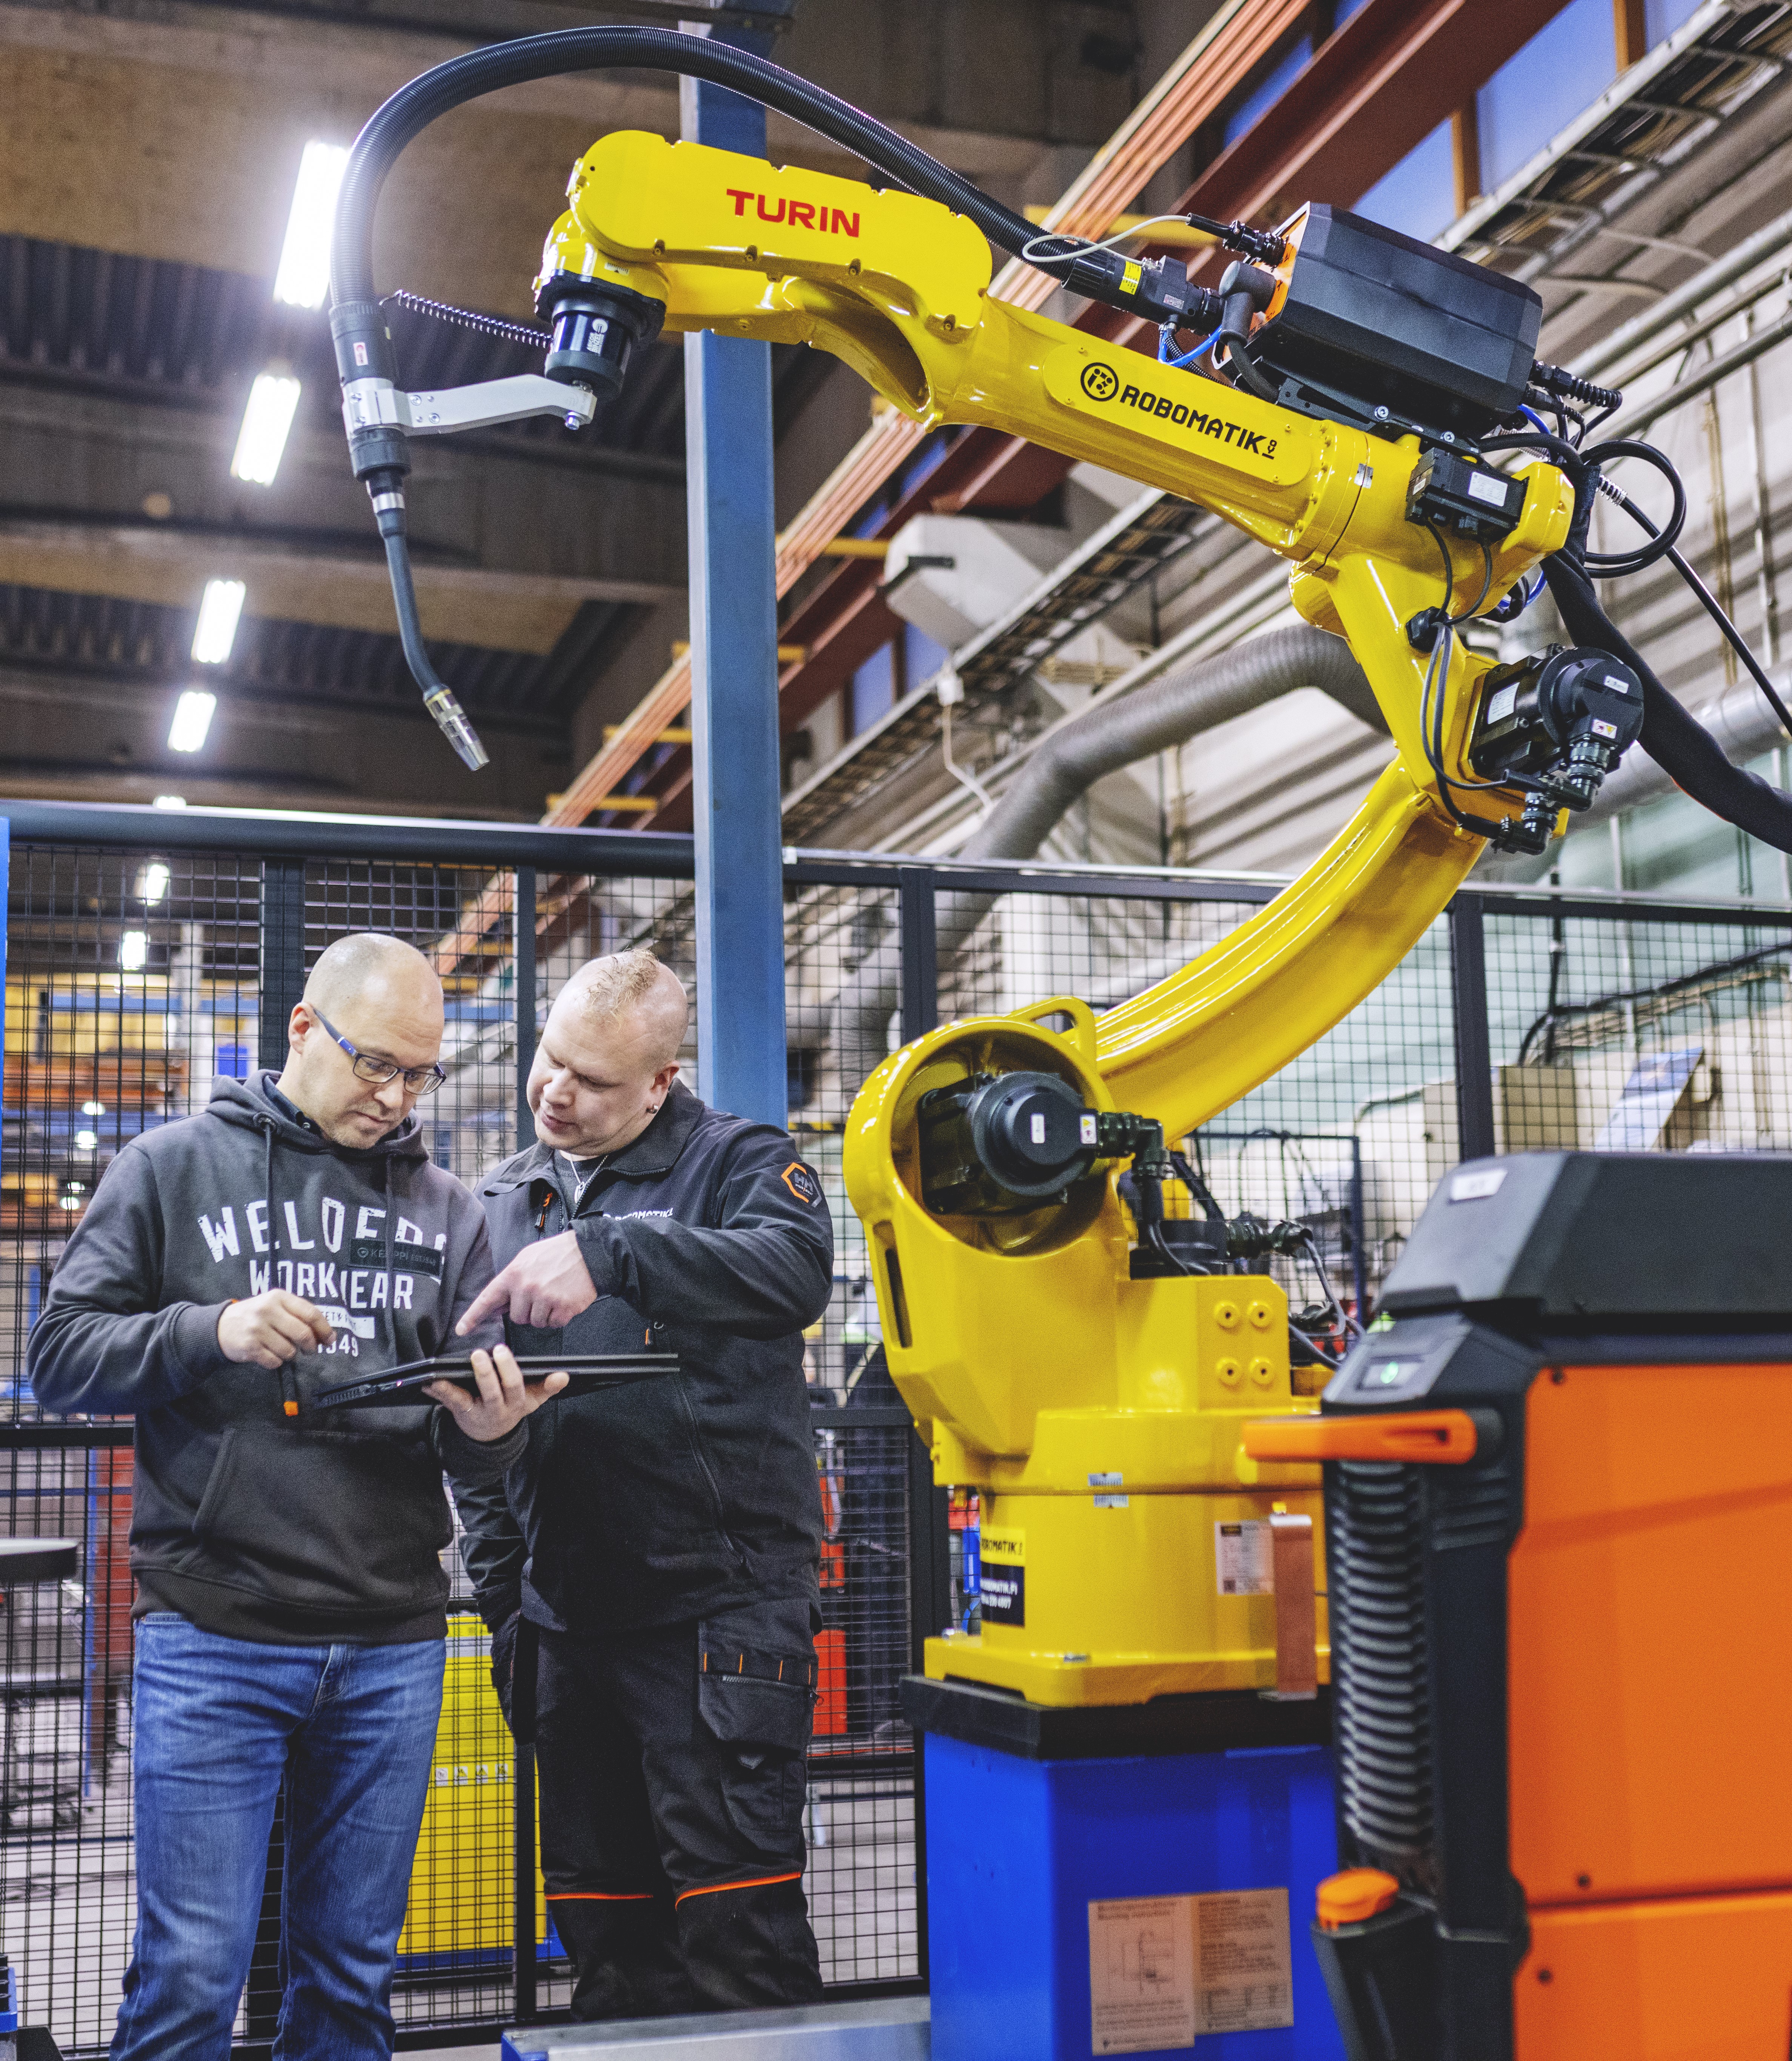 In this photo you can see the integrator together with a Kemppi automation specialist working with a welding robot system.